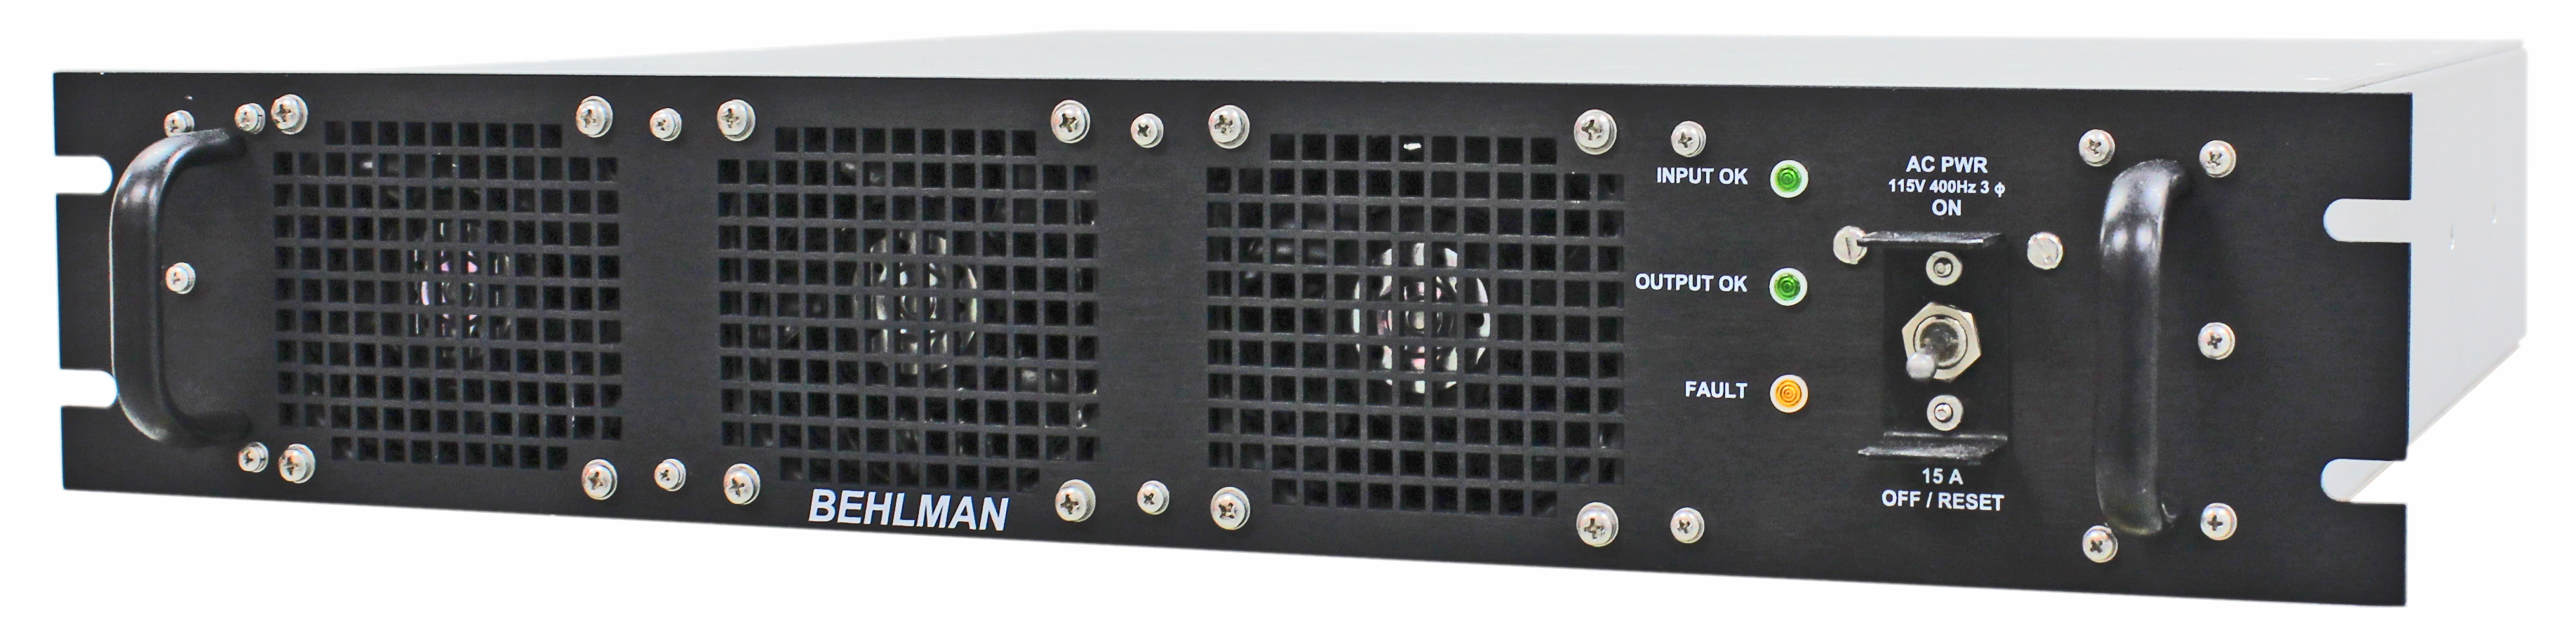 Behlman DCR2U Critical Mission COTS Power Supply provides 1,000 to 4,000 Watts of DC power from a wide range of AC and DC inputs. Ideal for military, commercial and industrial applications worldwide.